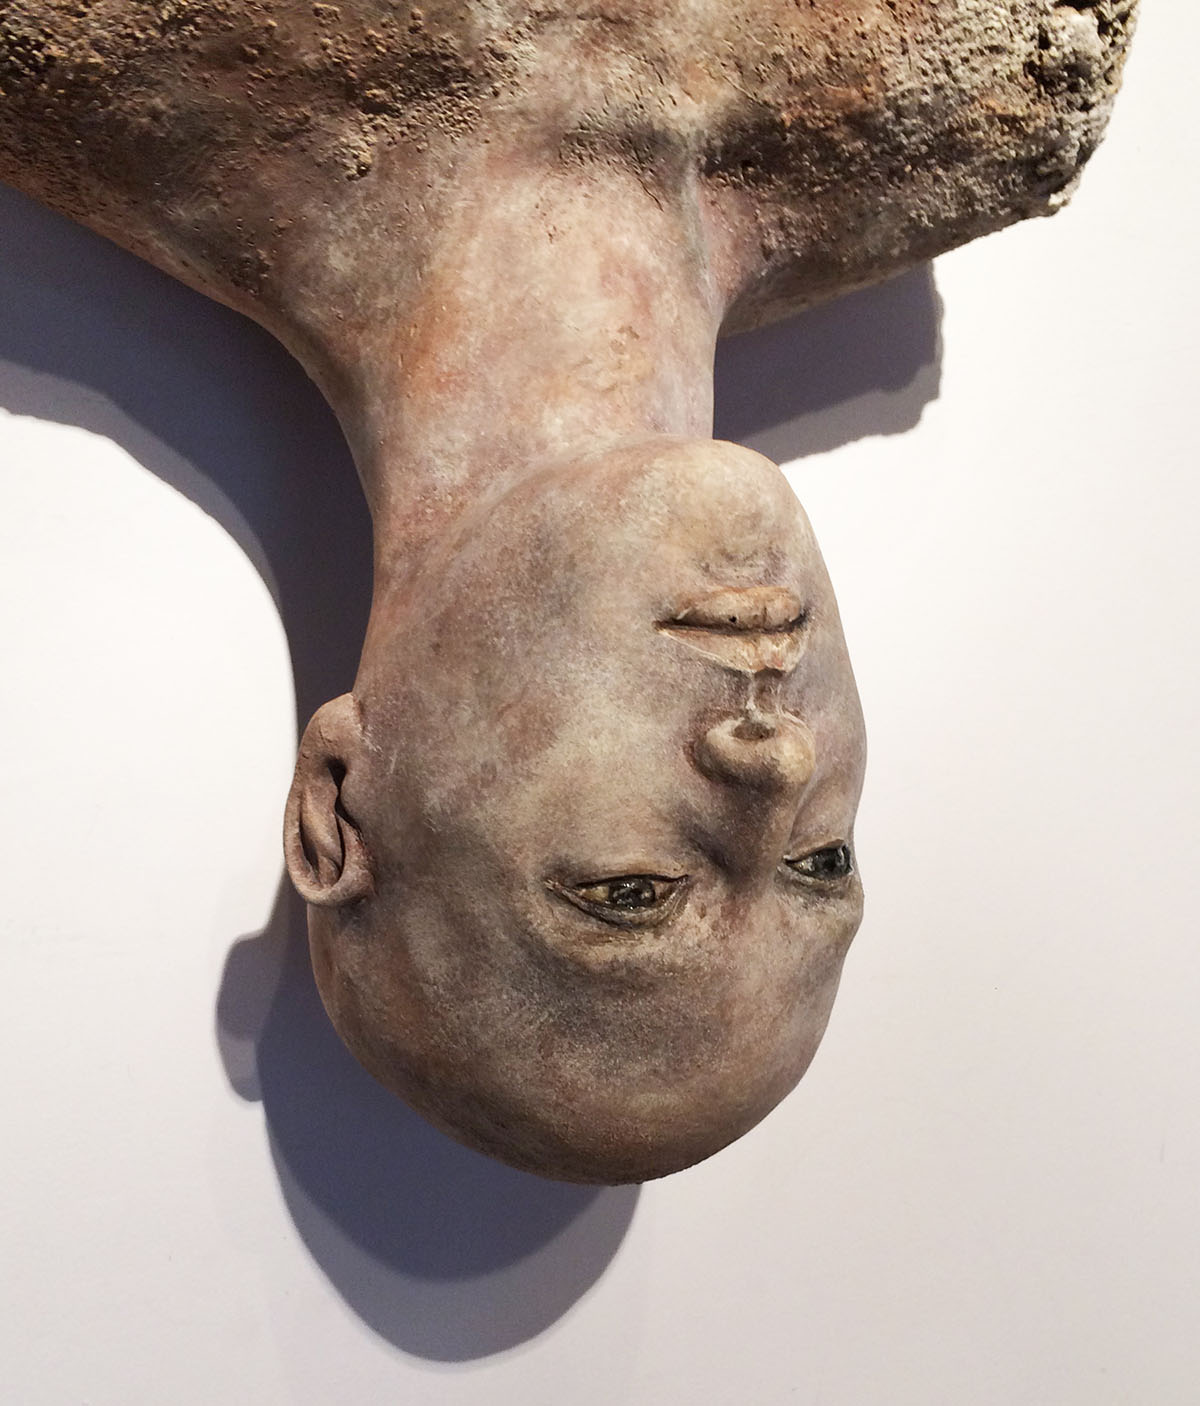 A clay sculpture by Alejandra Almuelle features the top half of a human figure hanging upside down, on display in 'The Many Shapes of Texas Clay.' Photo courtesy of the Rockport Center for the Arts.